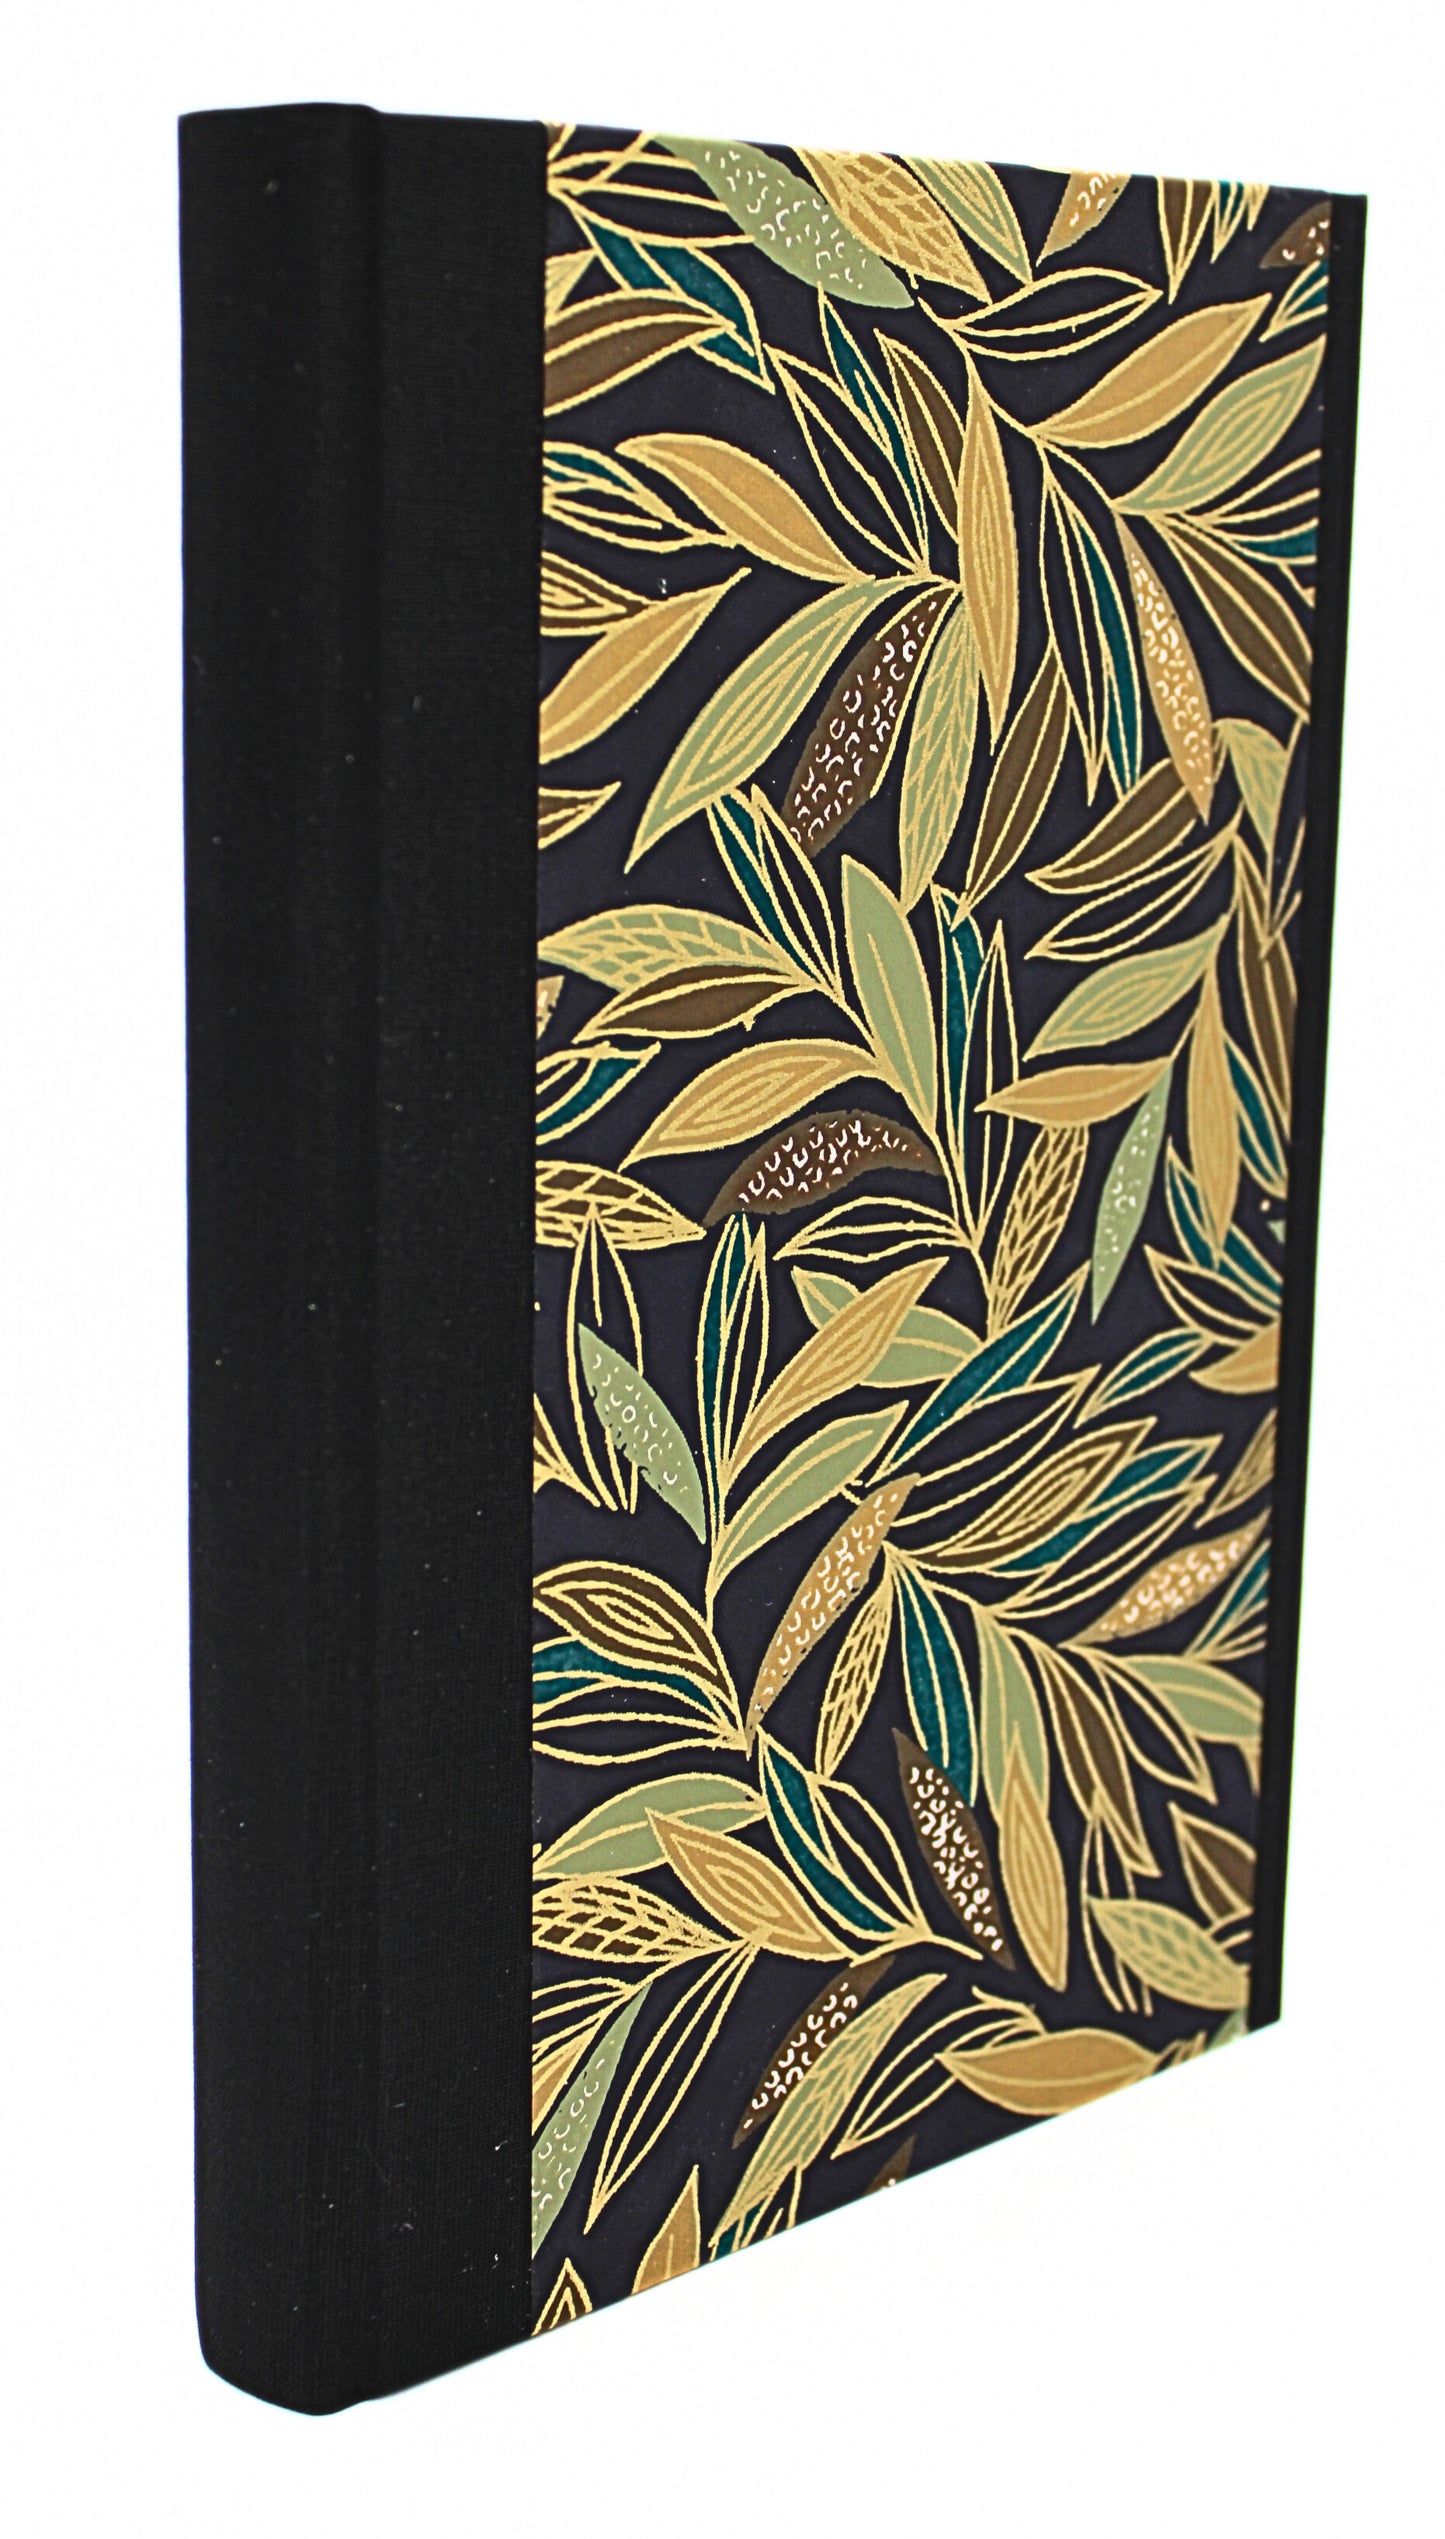 Hubert Bookbindery A5 Blank Notebook - GIlded Leaf Cover Side View